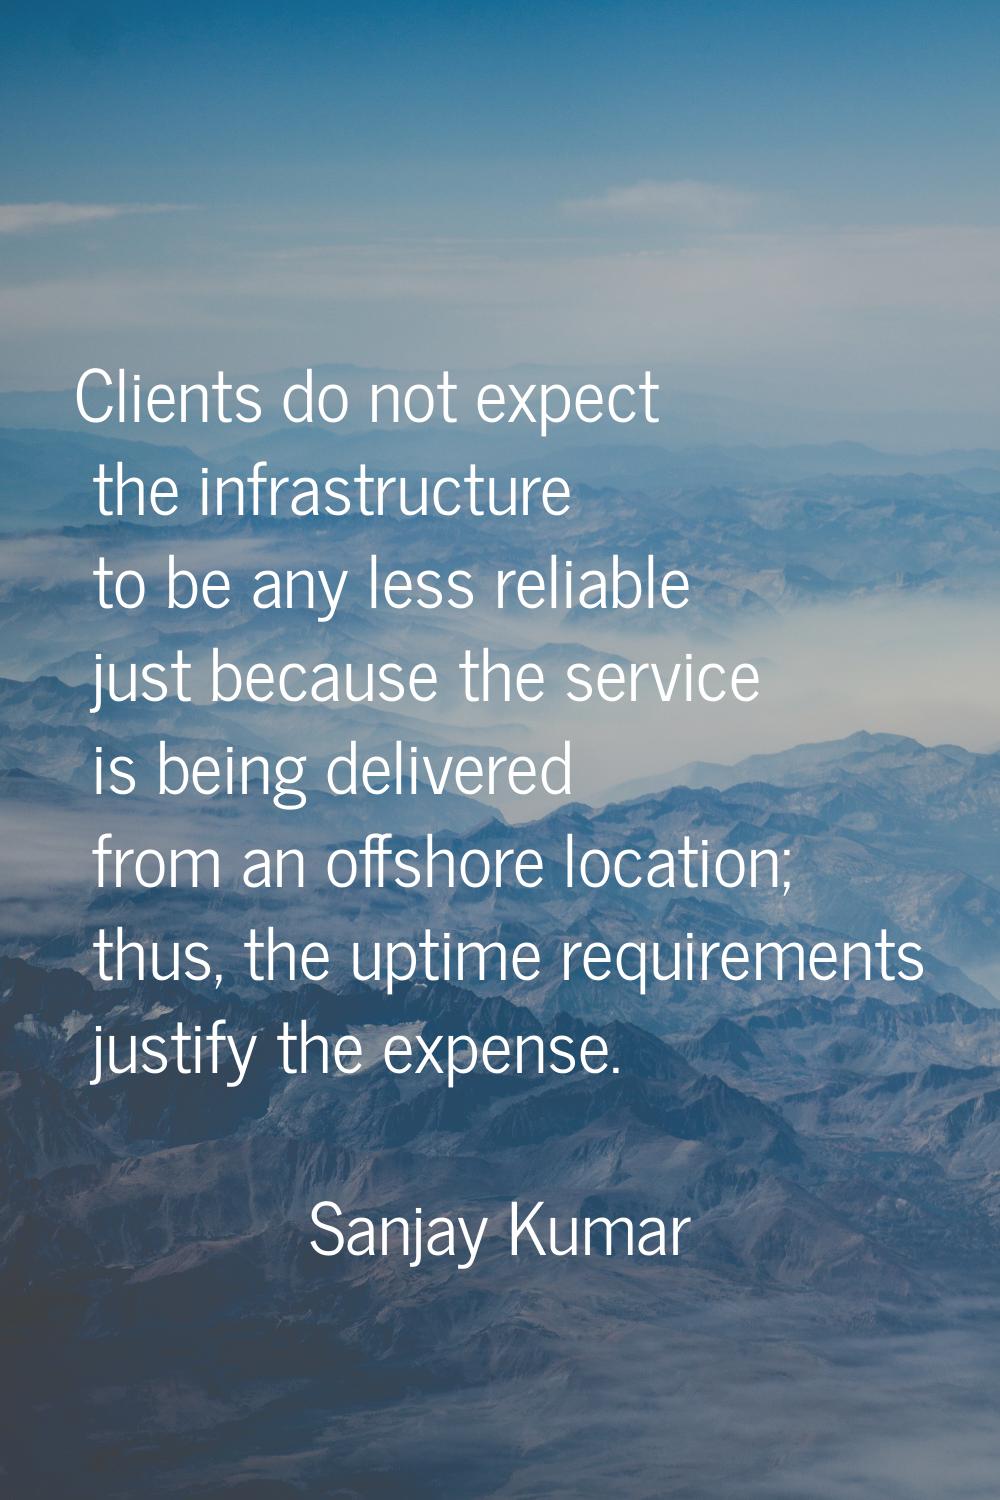 Clients do not expect the infrastructure to be any less reliable just because the service is being 